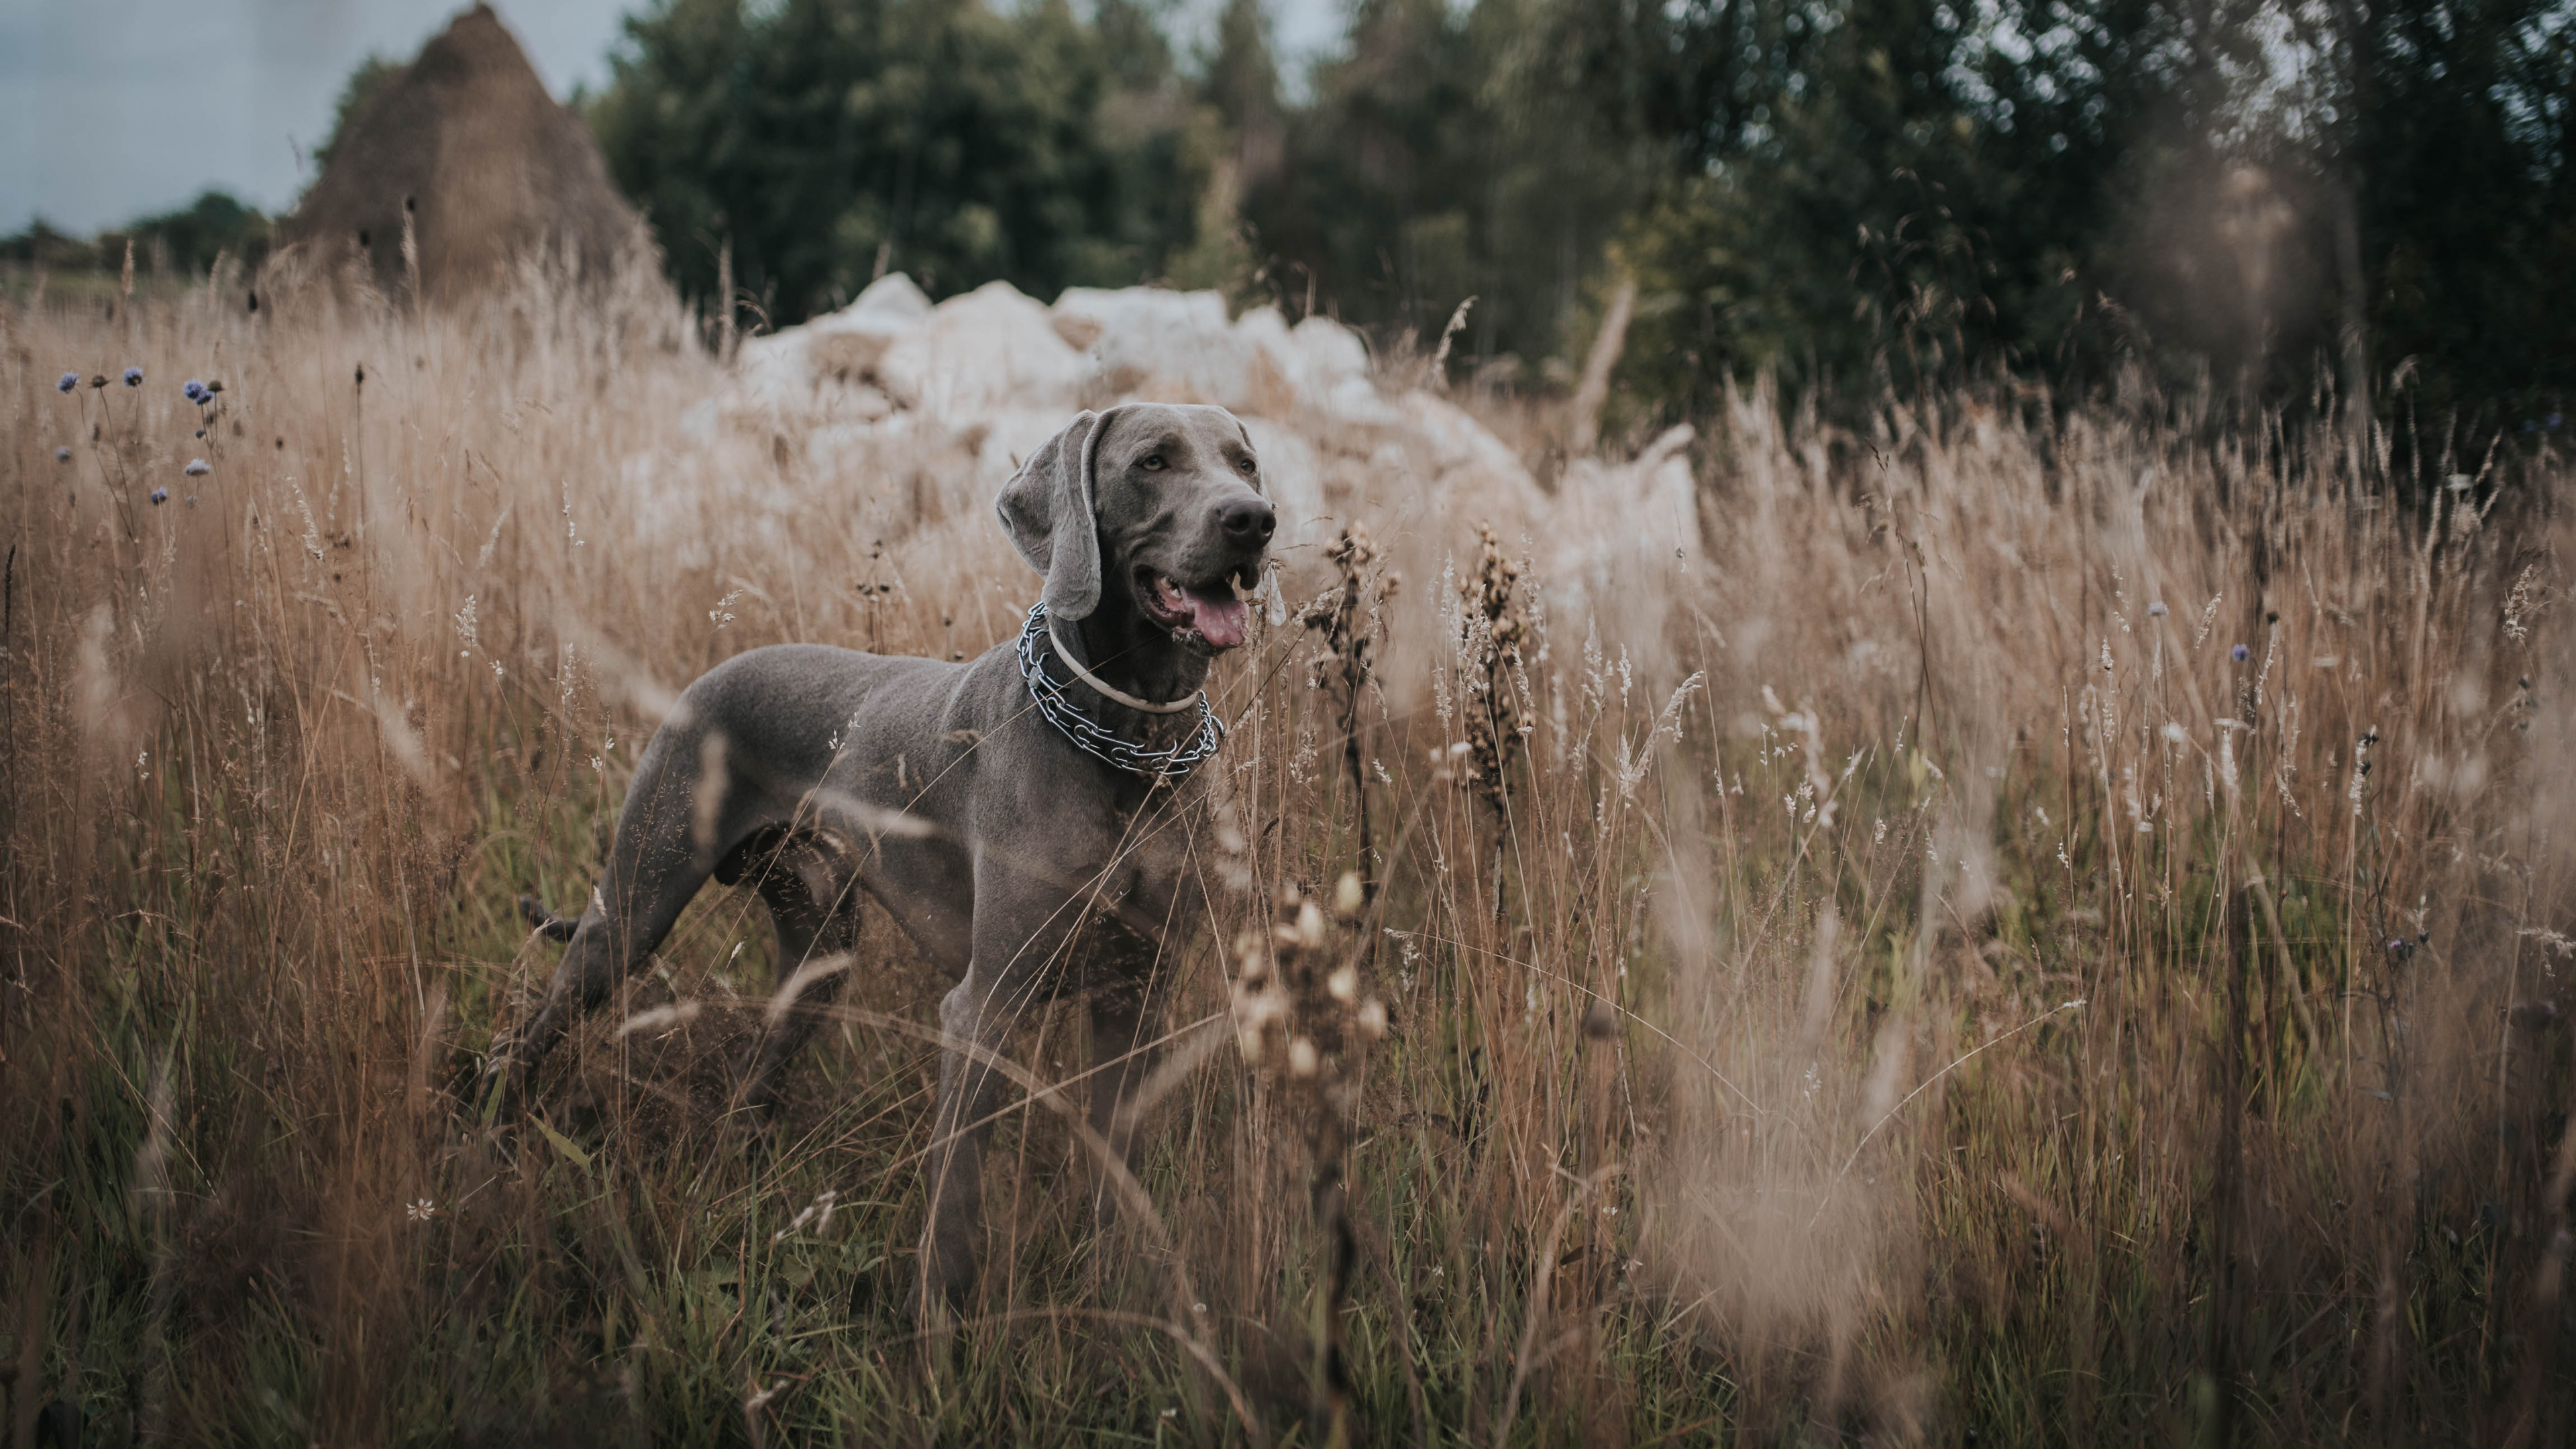 Gray Short Coated Dog on Brown Grass Field During Daytime. Wallpaper in 3840x2160 Resolution